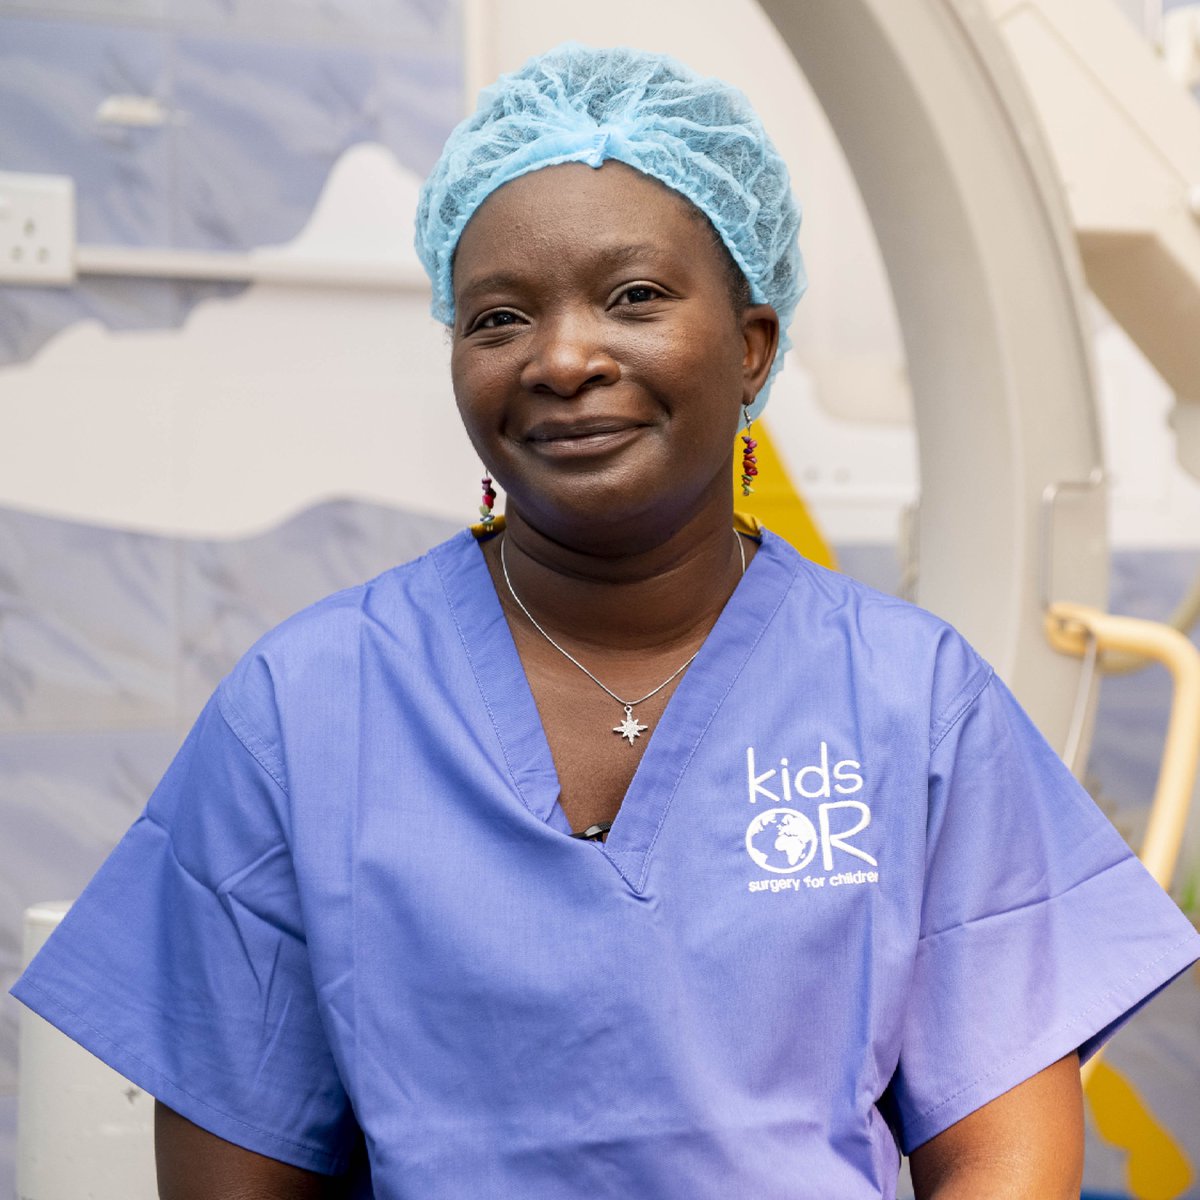 Paying tribute to the life-savers. 🙌

Celebrating Dr. Chomba, an incredible paediatric anaesthetist, who's helping save children's lives in Zambia. 🇿🇲

🗣️ 'I only meet the child for a short time, but in that period I get to earn their trust to let me take their breath and return